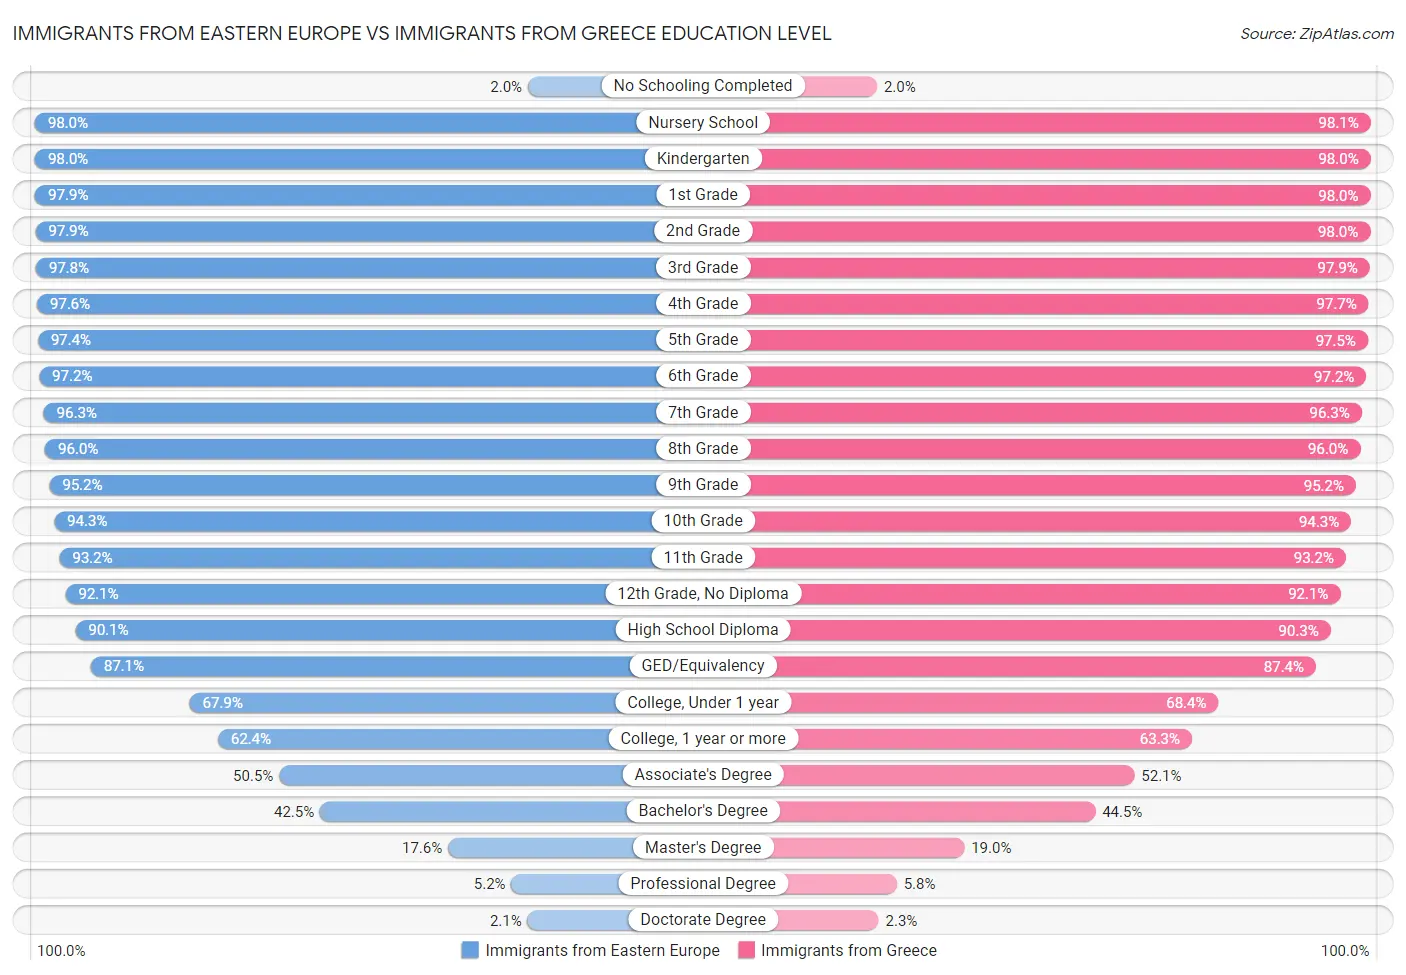 Immigrants from Eastern Europe vs Immigrants from Greece Education Level